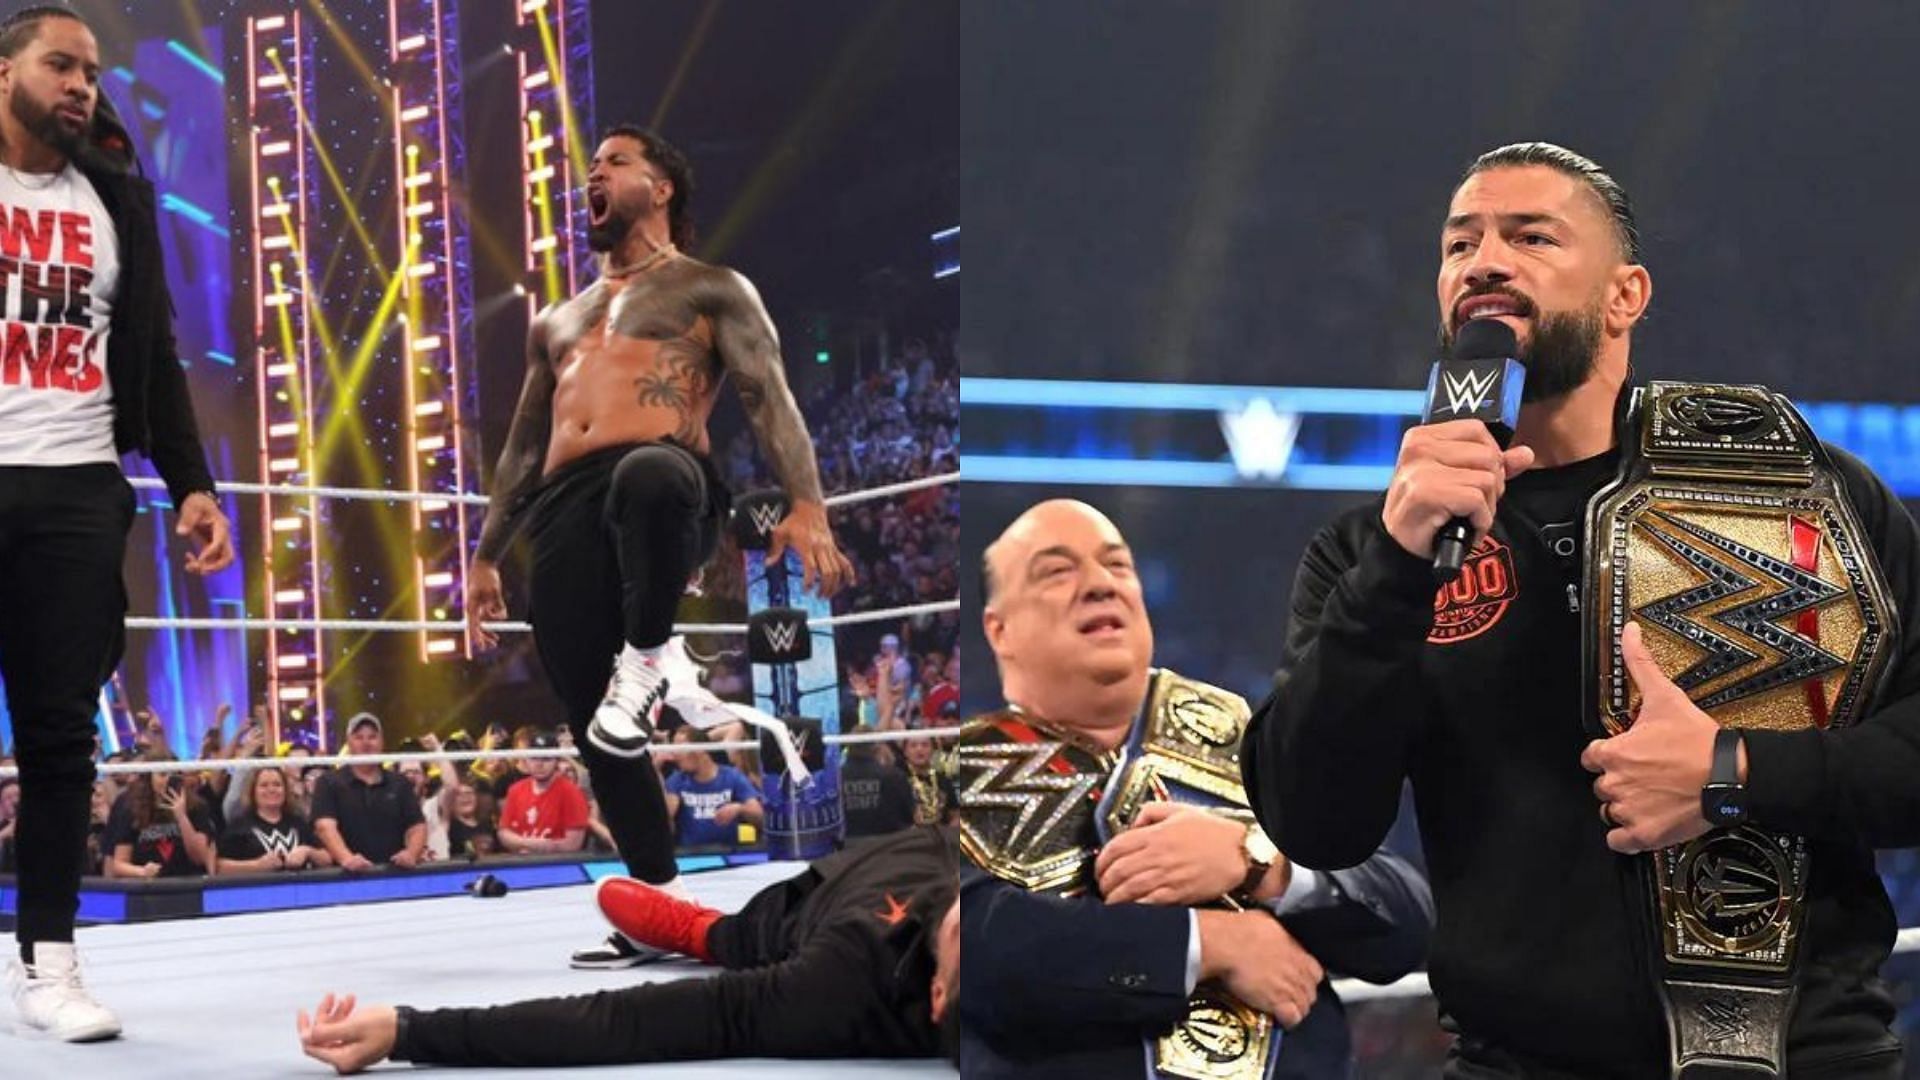 The Usos will be in action against Roman Reigns and Solo Sikoa